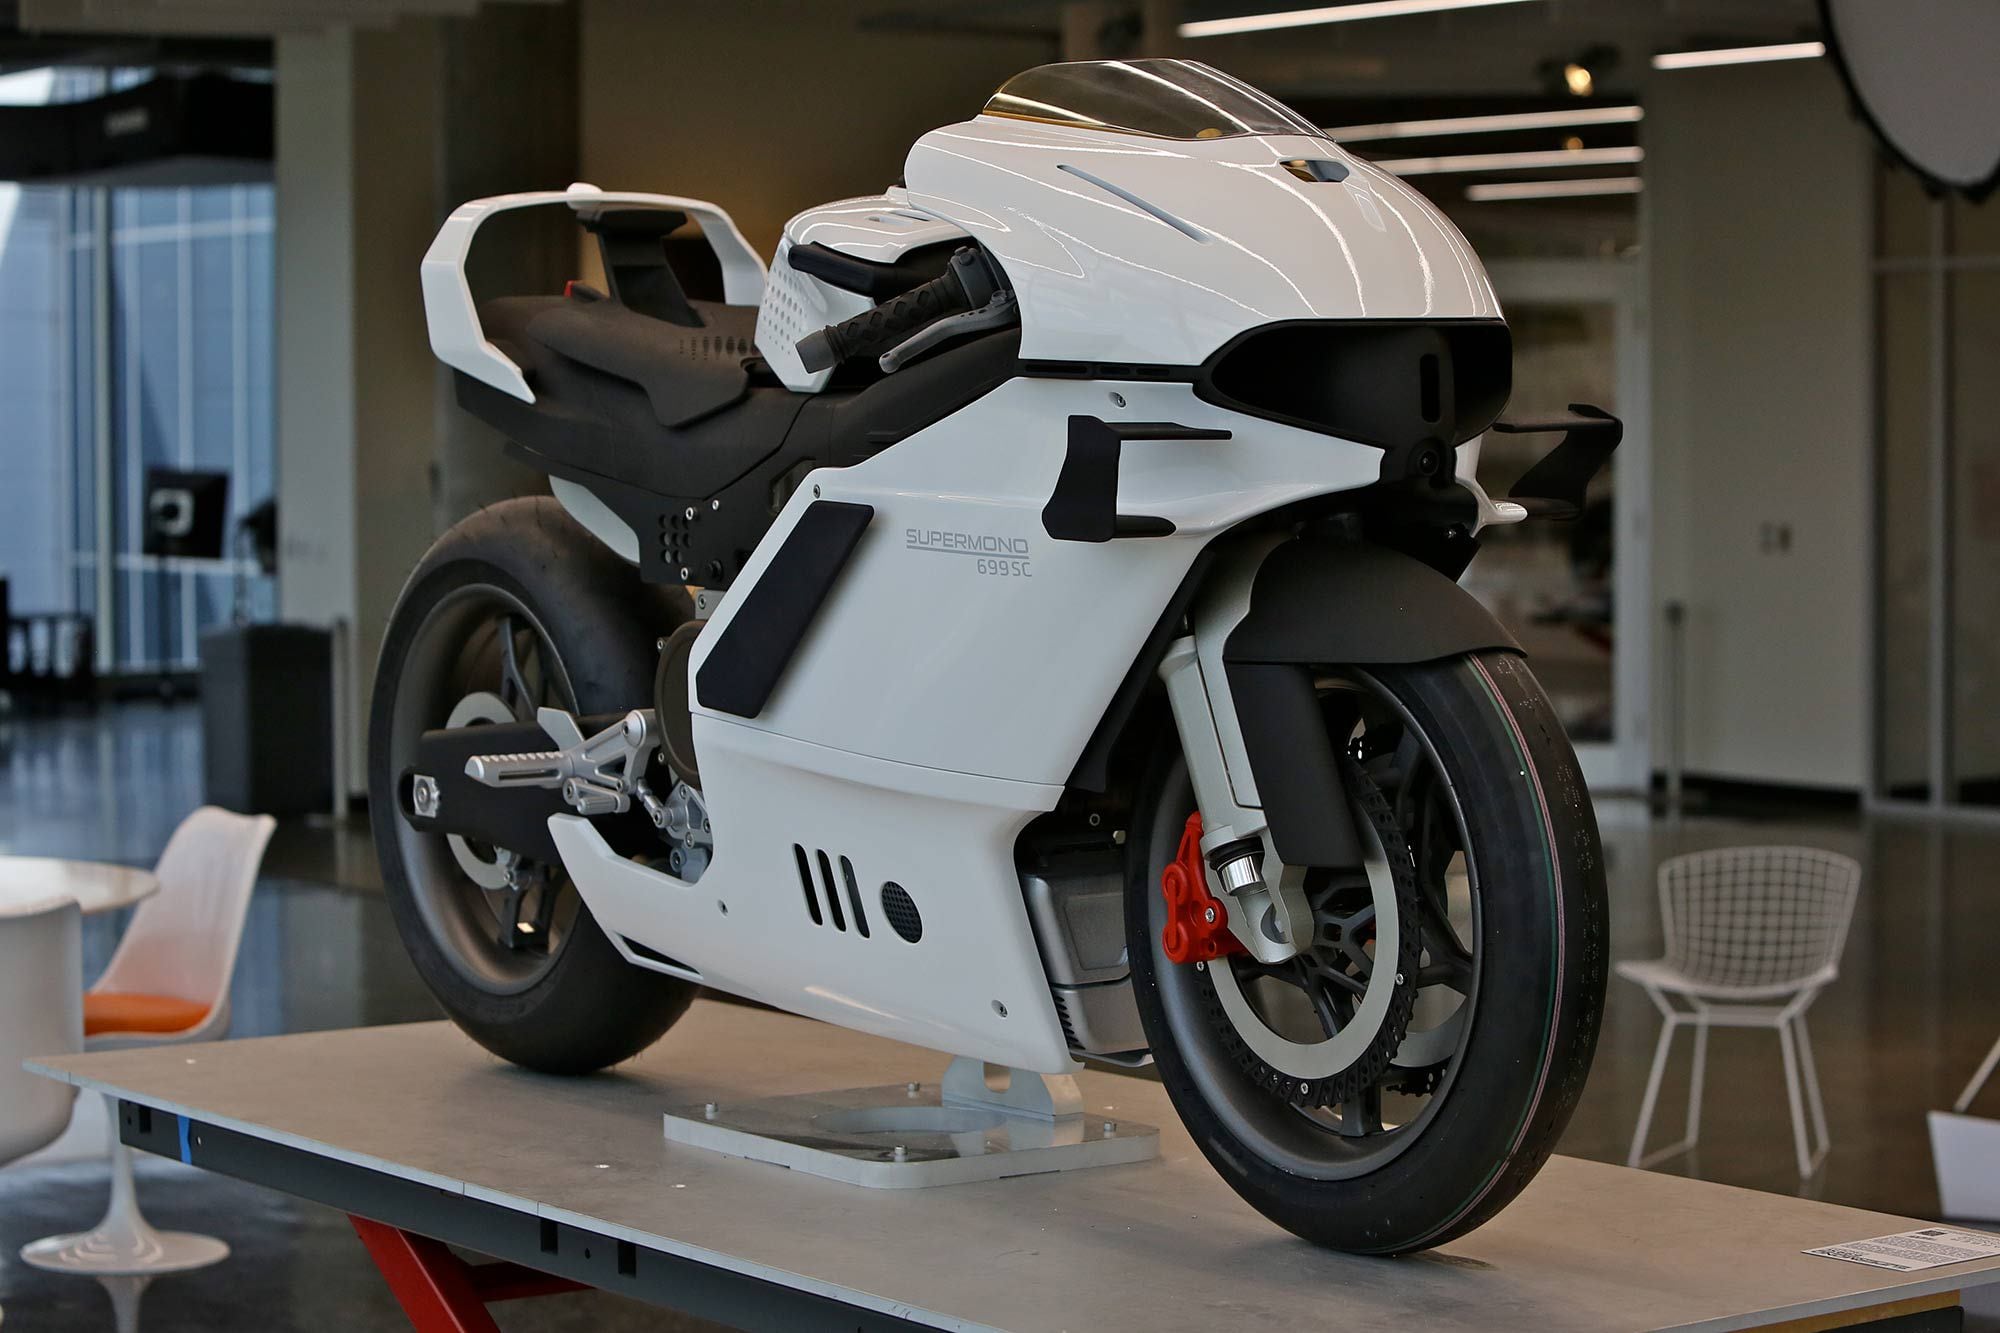 Note winglets and overall slippery aero shape, especially rounded low-drag nose and the sculpted rear to help the bike close the hole it makes through the air.